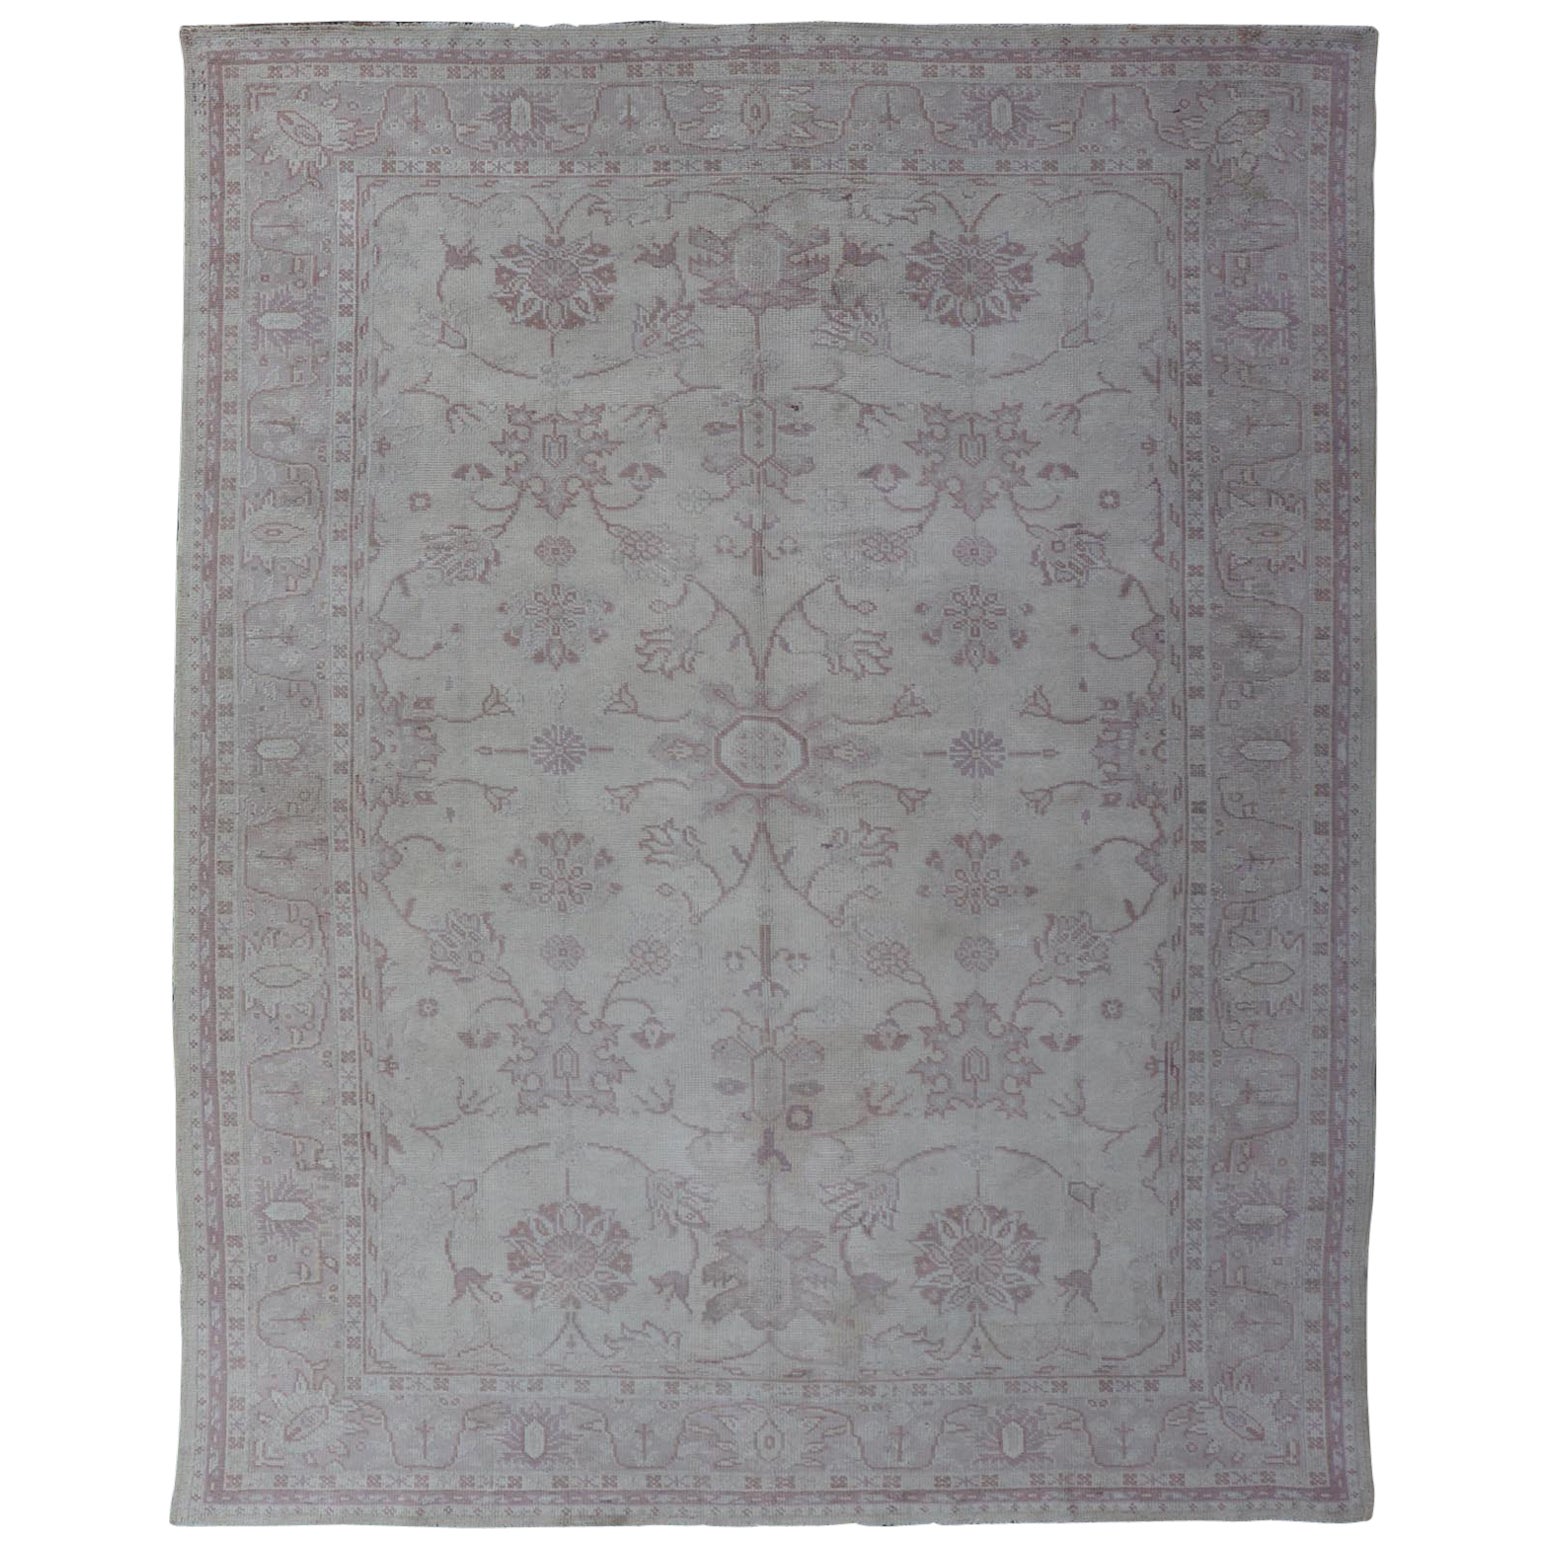 Antique Turkish Oushak Rug with Floral Patterns in Cream and Neutral Colors 